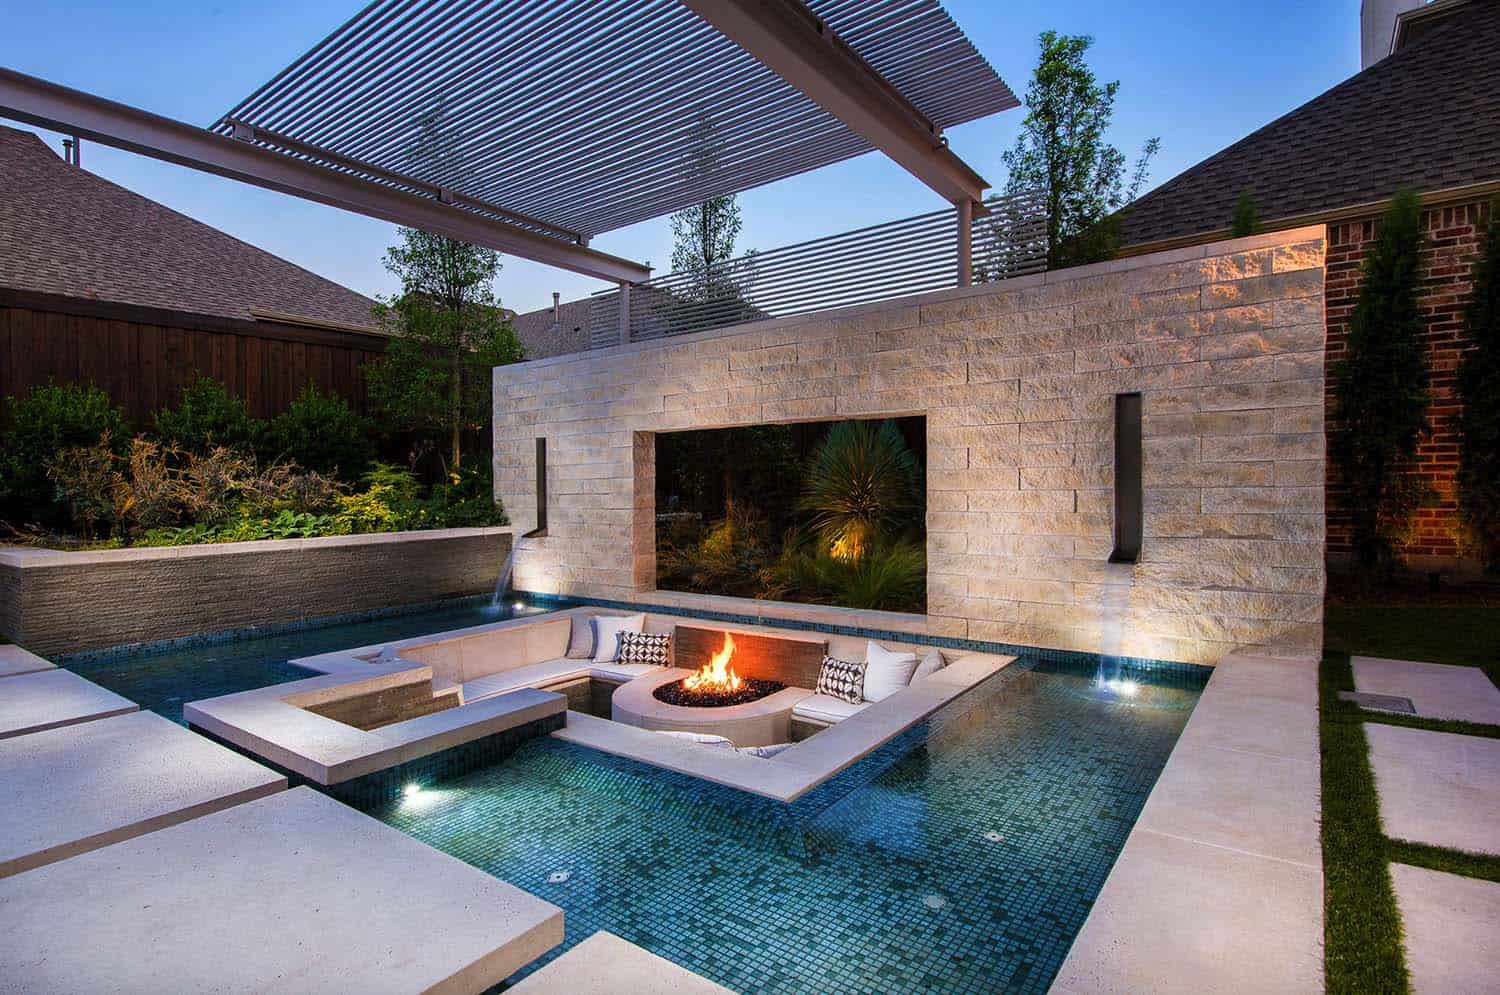 28 Inspiring Fire Pit Ideas To Create A, Pool And Fire Pit